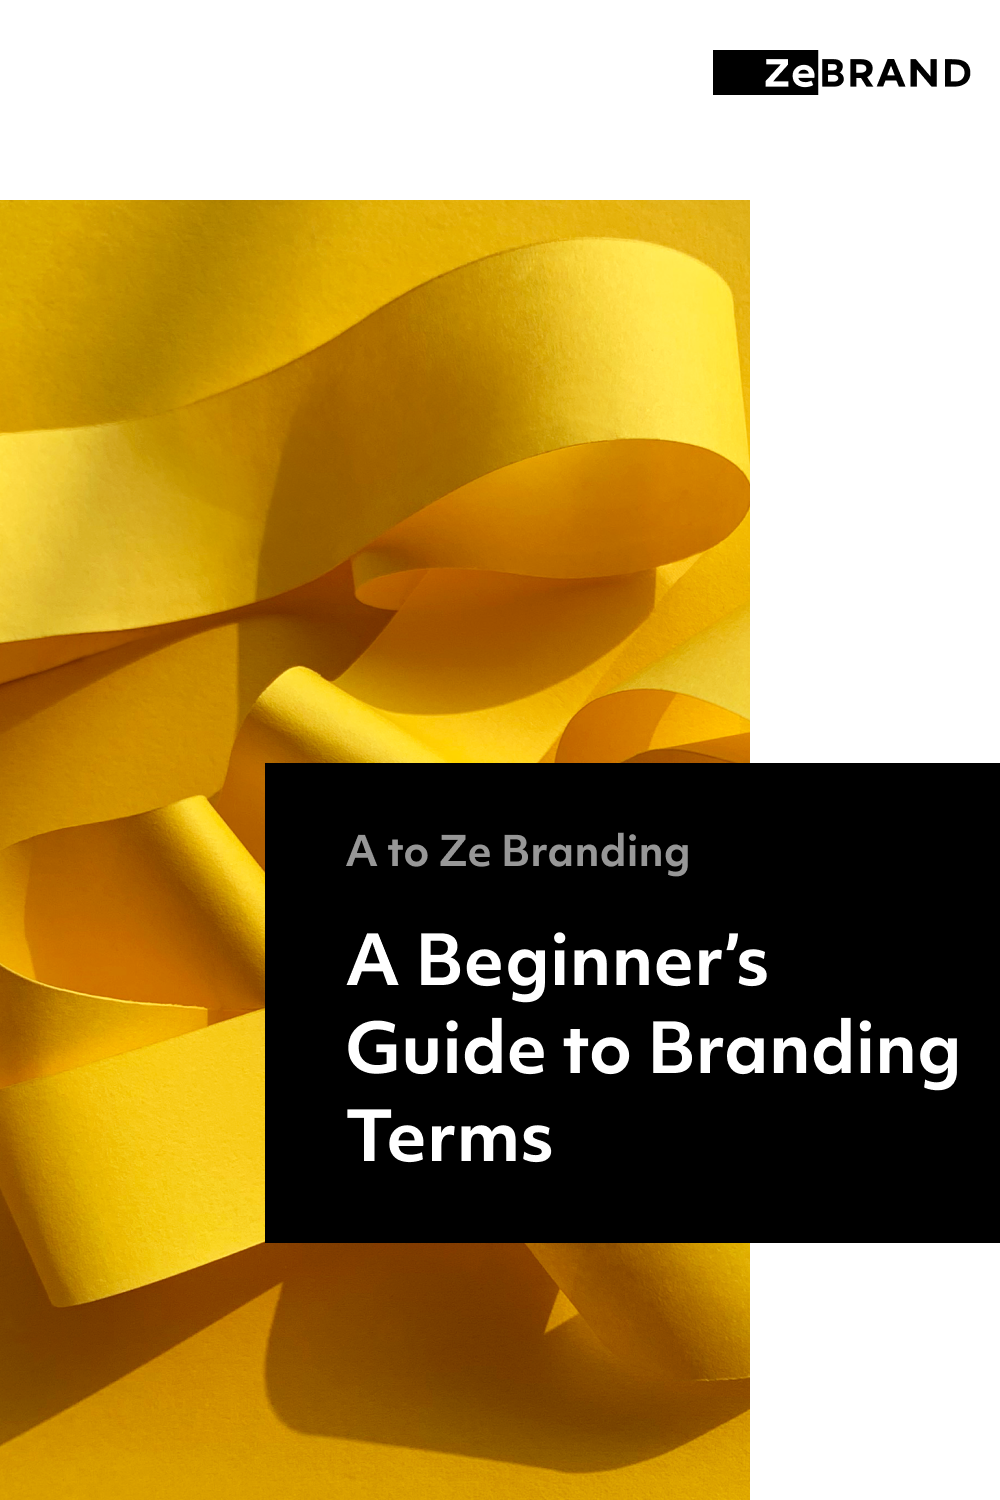 A Beginner's Guide to Branding Terms